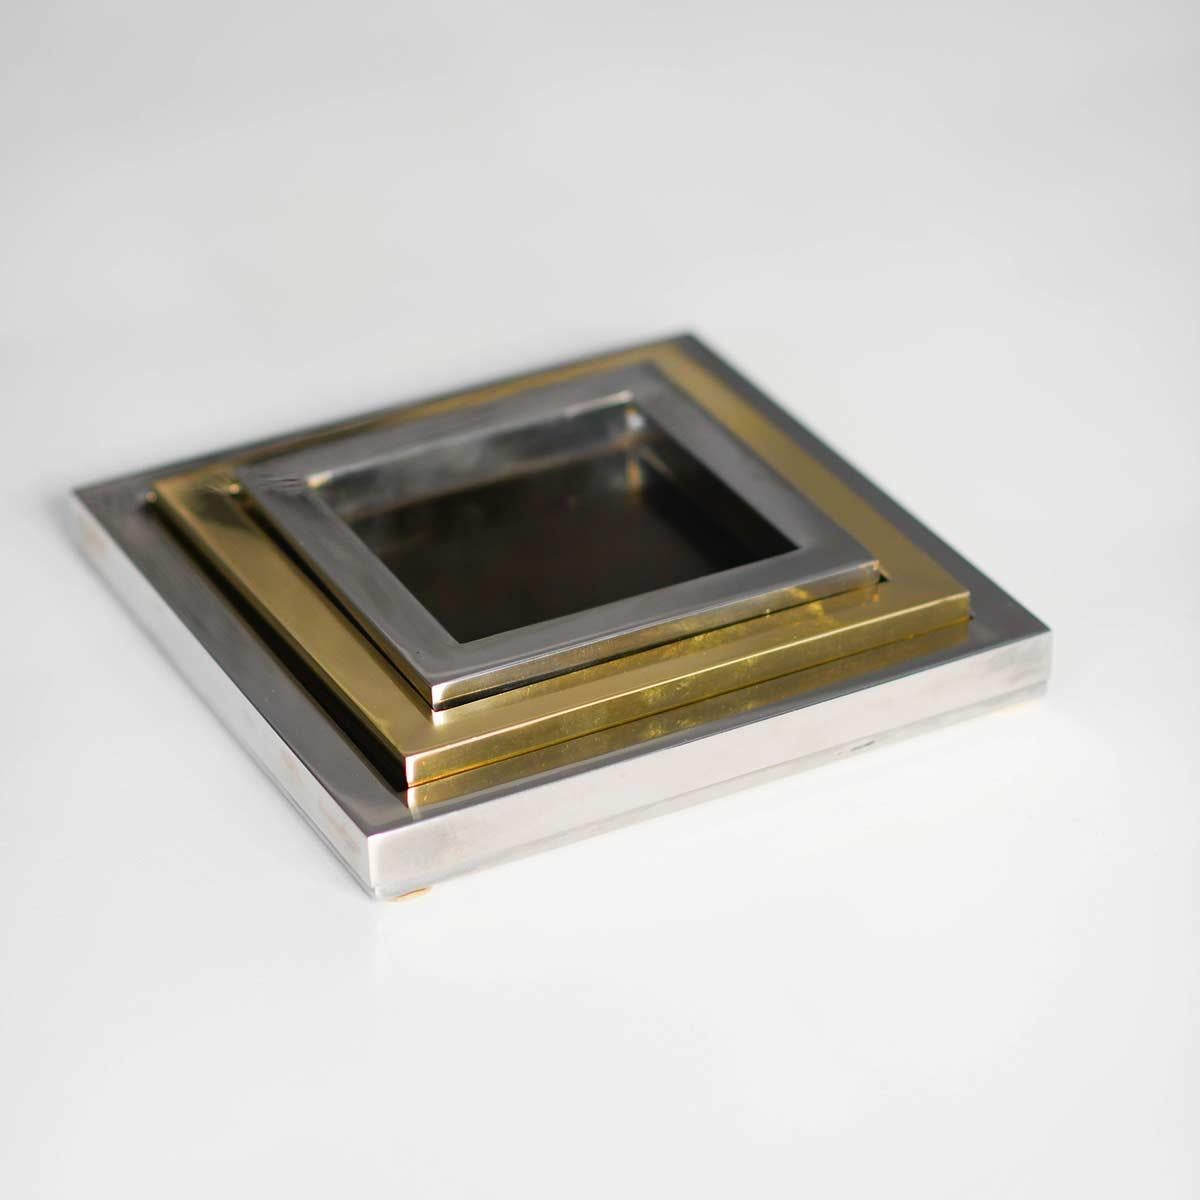 Romeo Rega coin tray in metal and brass from 1980s.
The product consists of a set of three pieces.